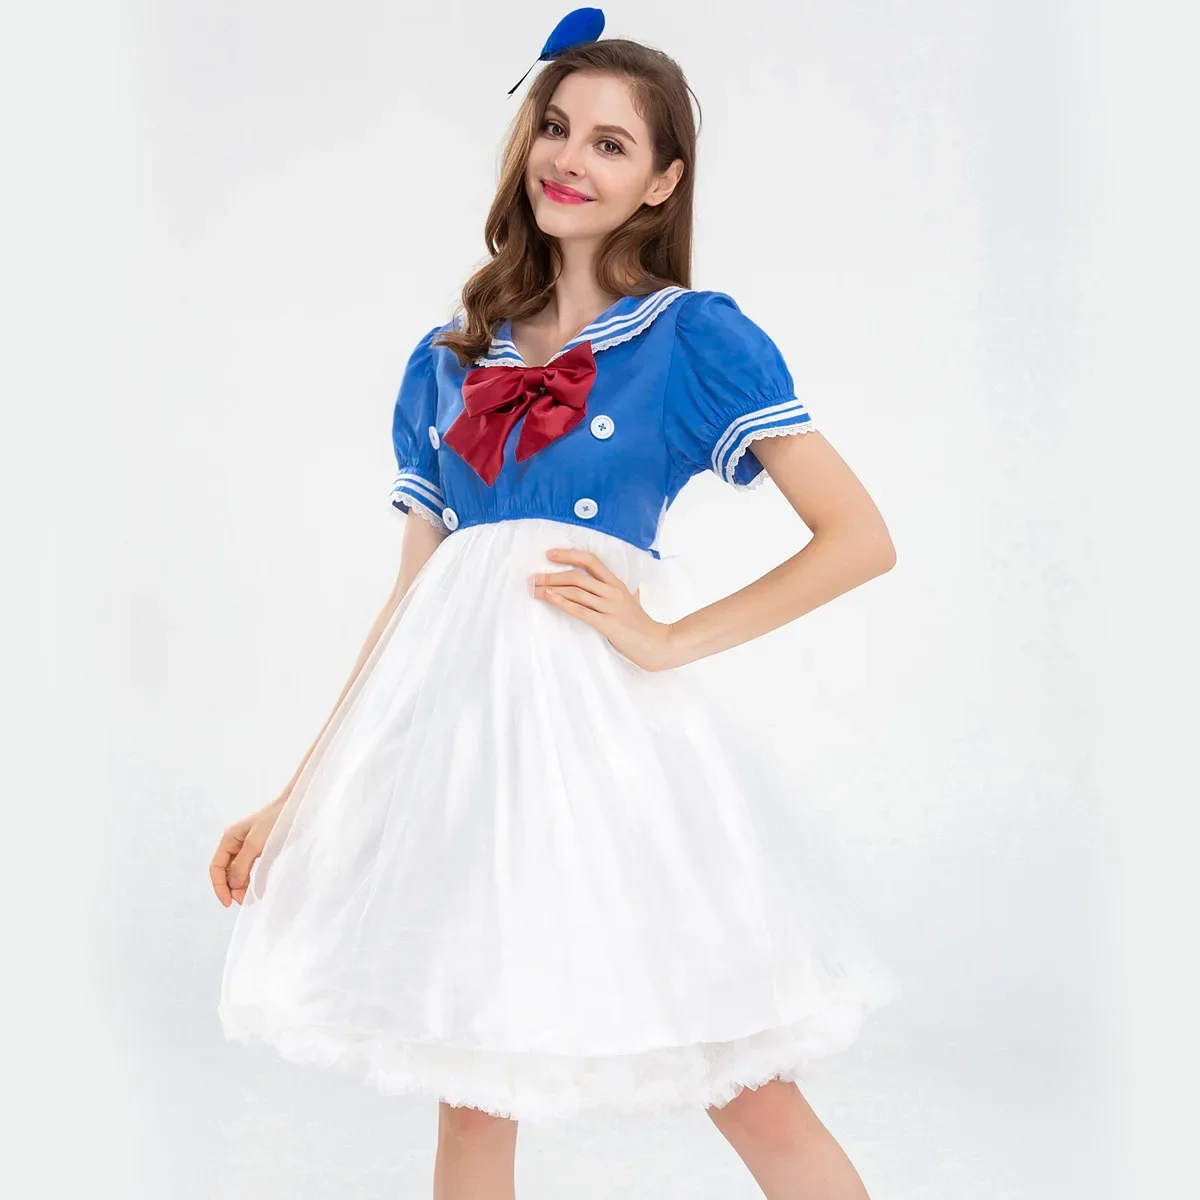 

Halloween Masquerade Party Women Sailor Costume Navy Soldier Uniforms Cosplay Costume Overalls Funny Dress Stage Cosplay